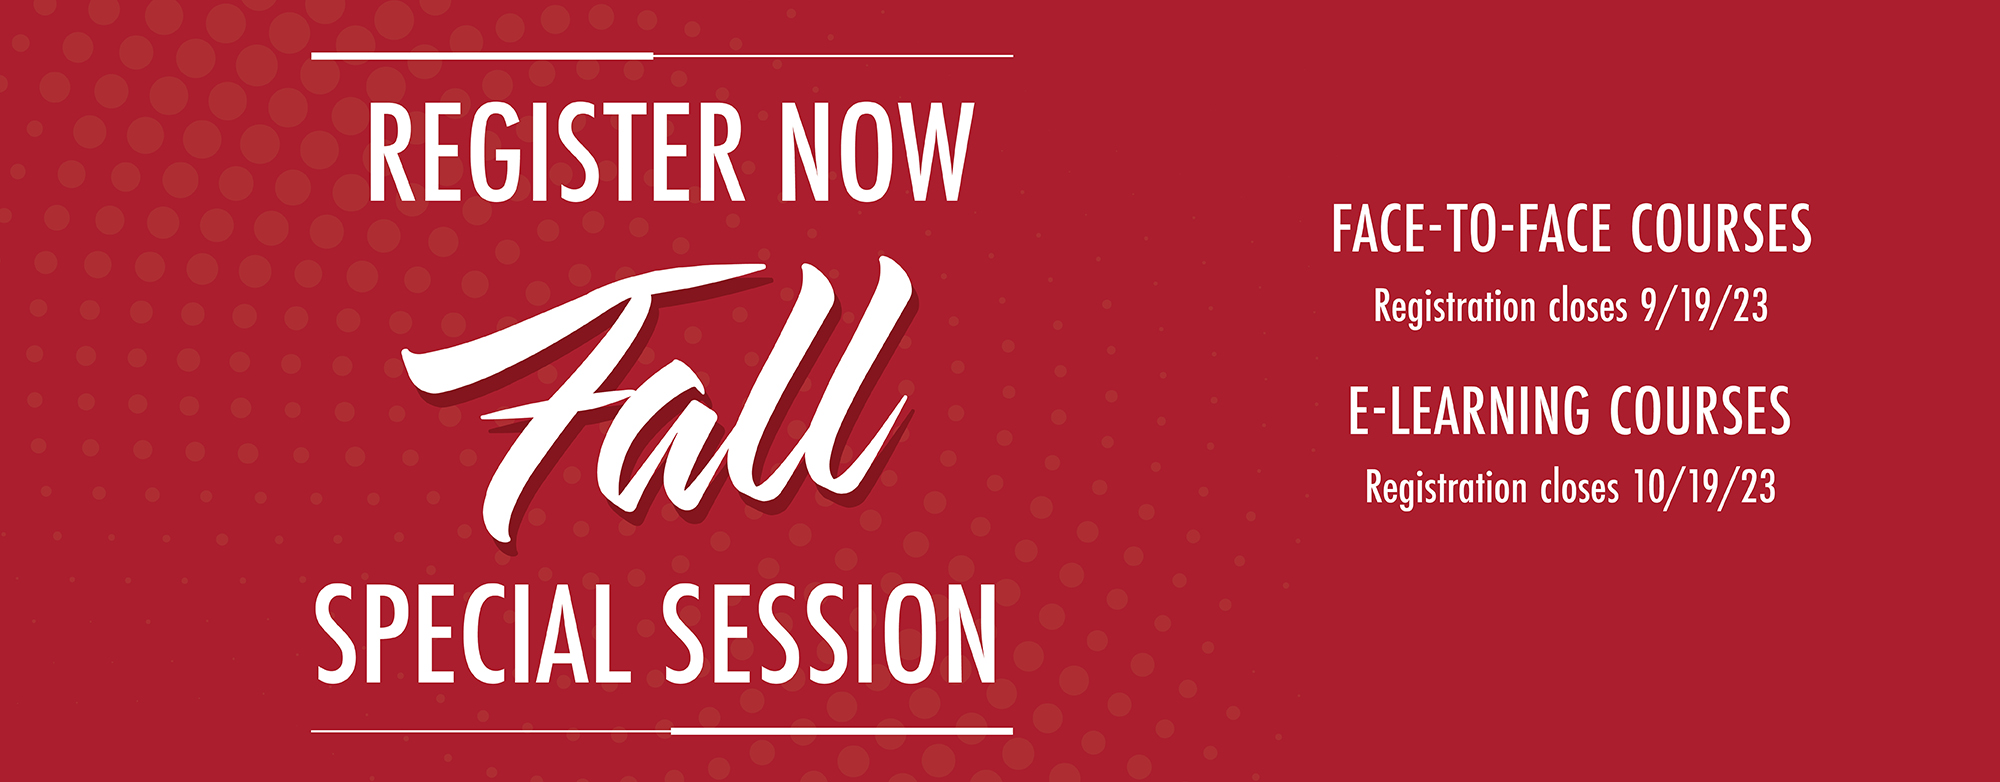 Register Now for the Fall Special Session